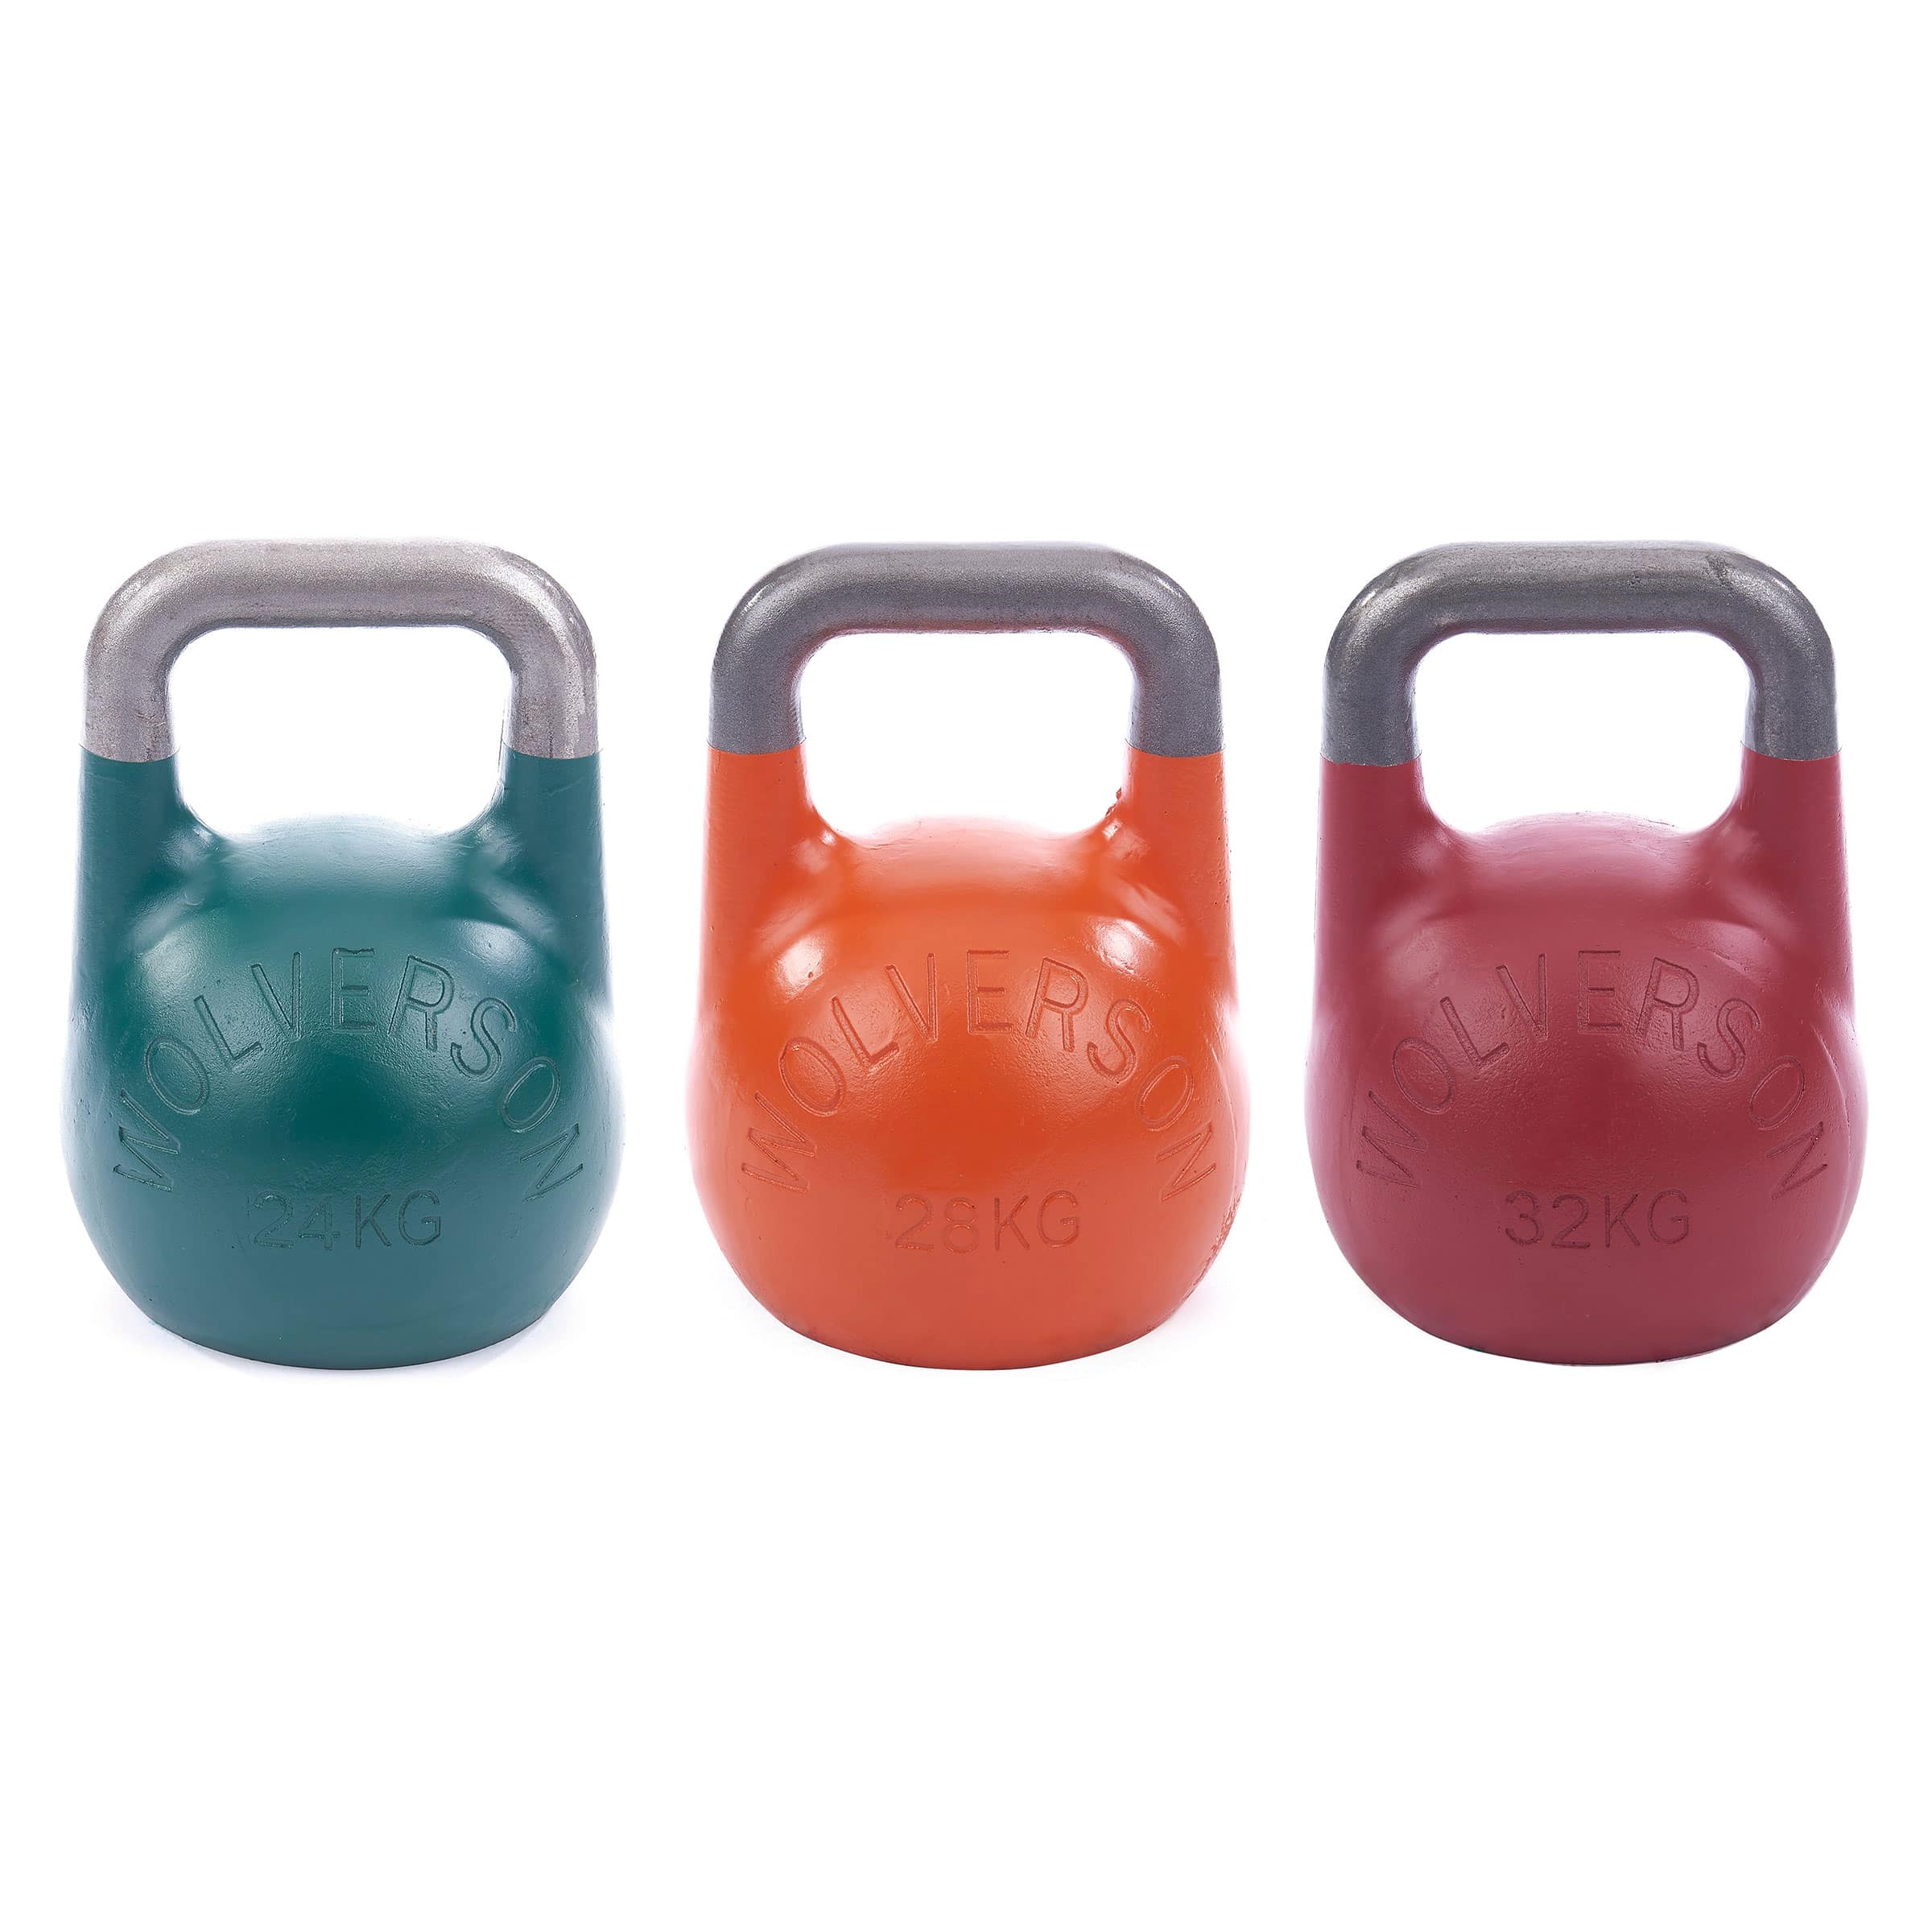 Wolverson Competition Kettlebells Sets - Wolverson Fitness